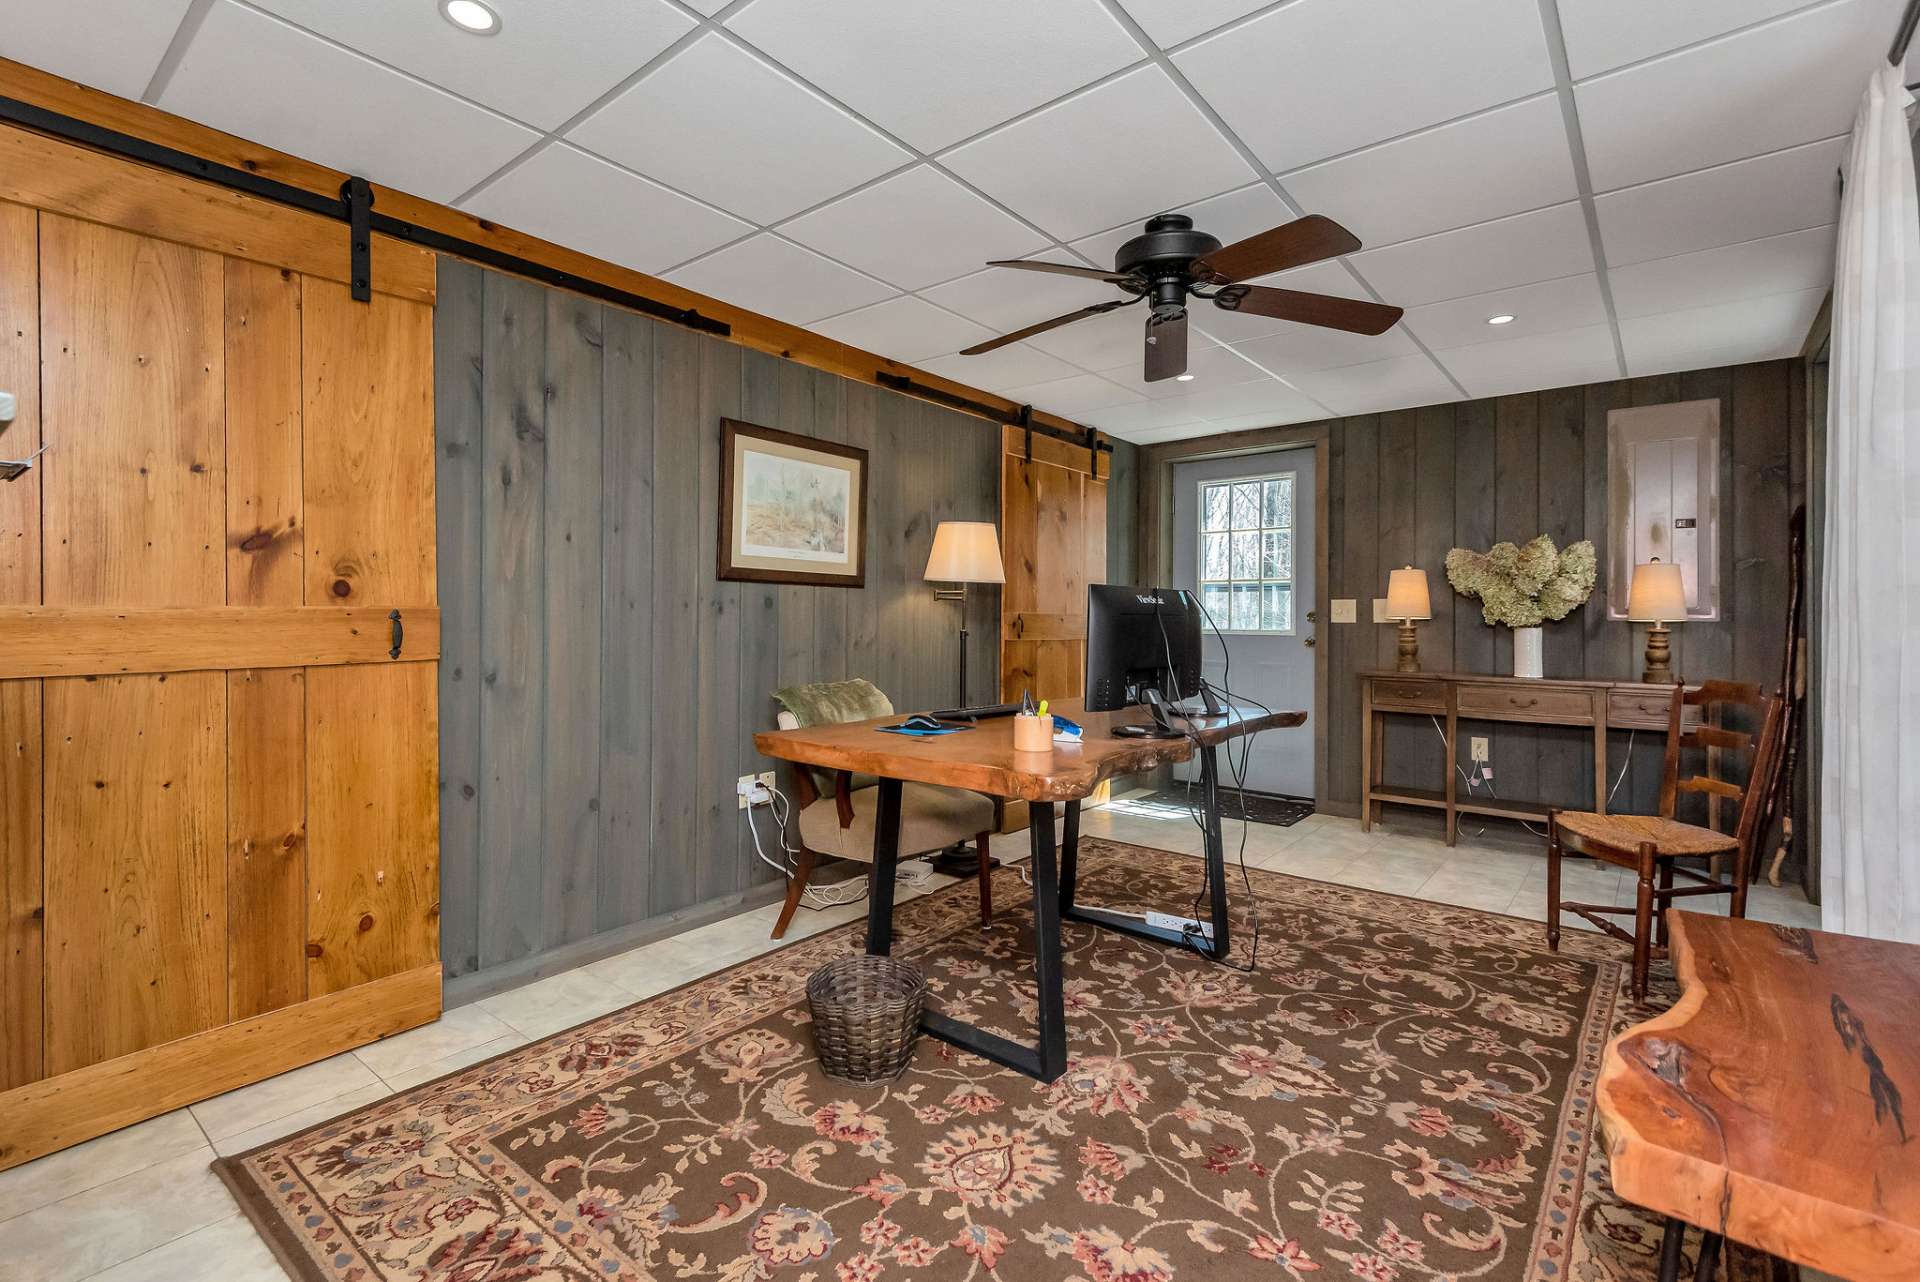 A spacious bonus room offers versatility and flexibility for various uses. Whether utilized as a home office, game room, or den, this multipurpose space provides ample room for the diverse needs and preferences of occupants and guests.